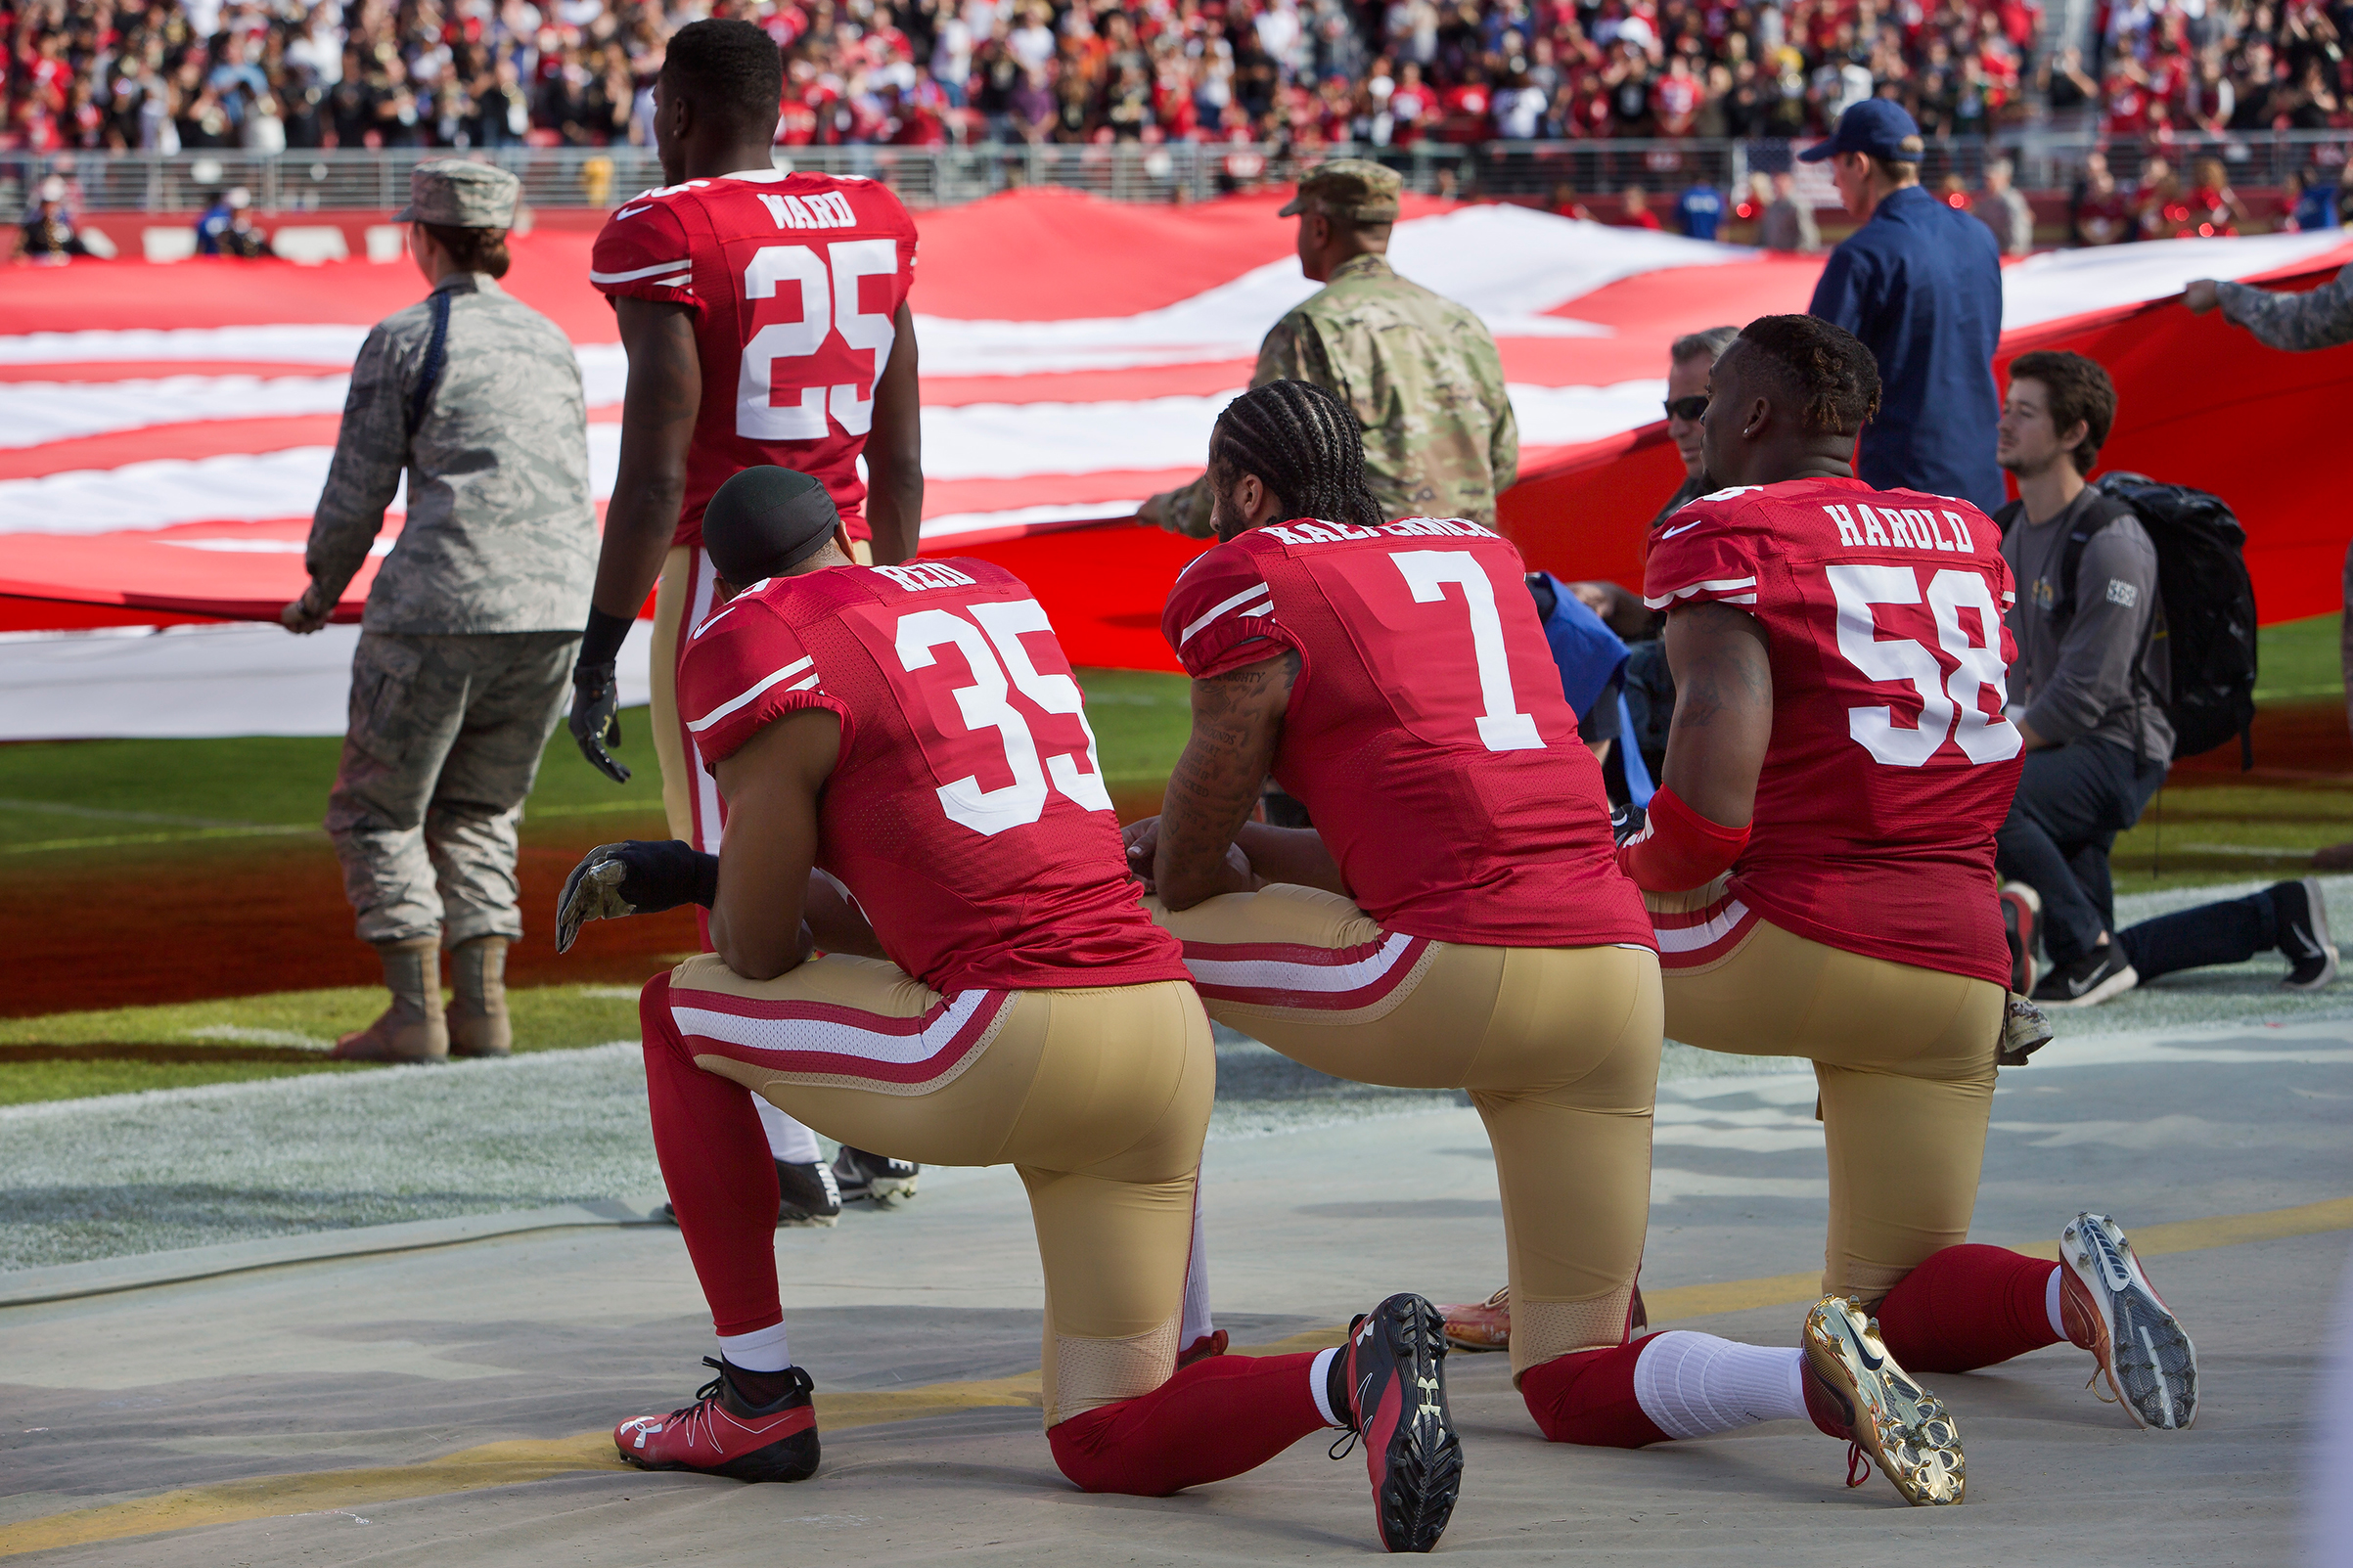 Quarterback Colin Kaepernick #7, safety Eric Reid #35, and linebacker Eli Harold #58 of the San Francisco 49ers kneel before a game against the New Orleans Saints with the U.S. flag unfurled in honor of the armed services on Nov. 6 2016 at Levi's Stadium in Santa Clara, Calif. (Brian Bahr—Getty Images)